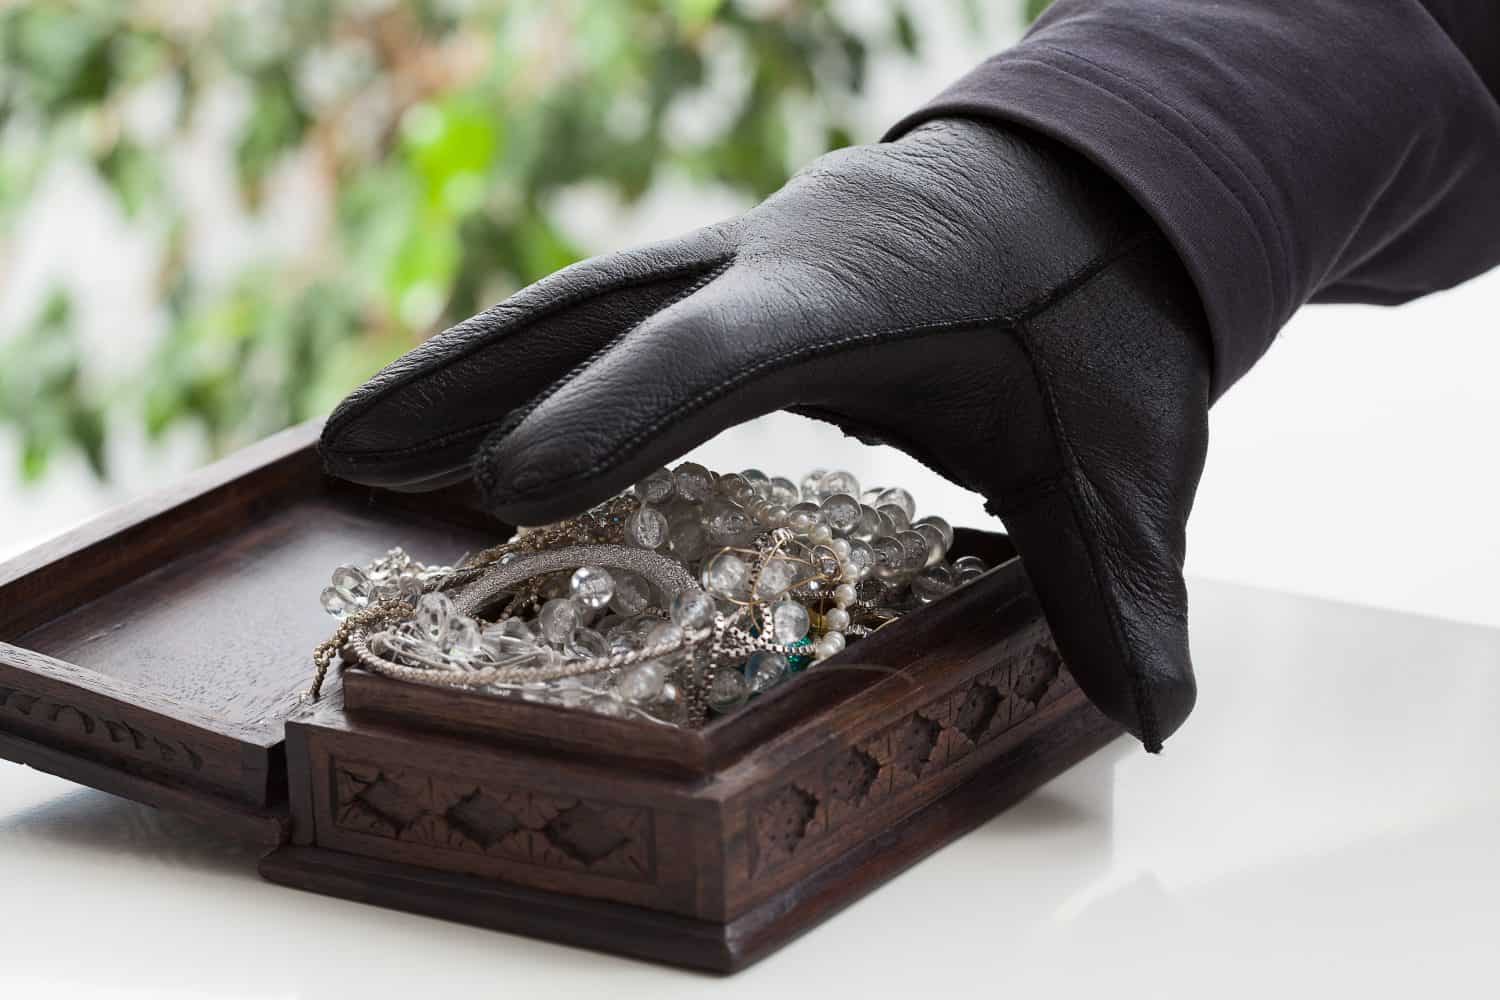 A closeup of a hand of a man about to steal a jewelery box